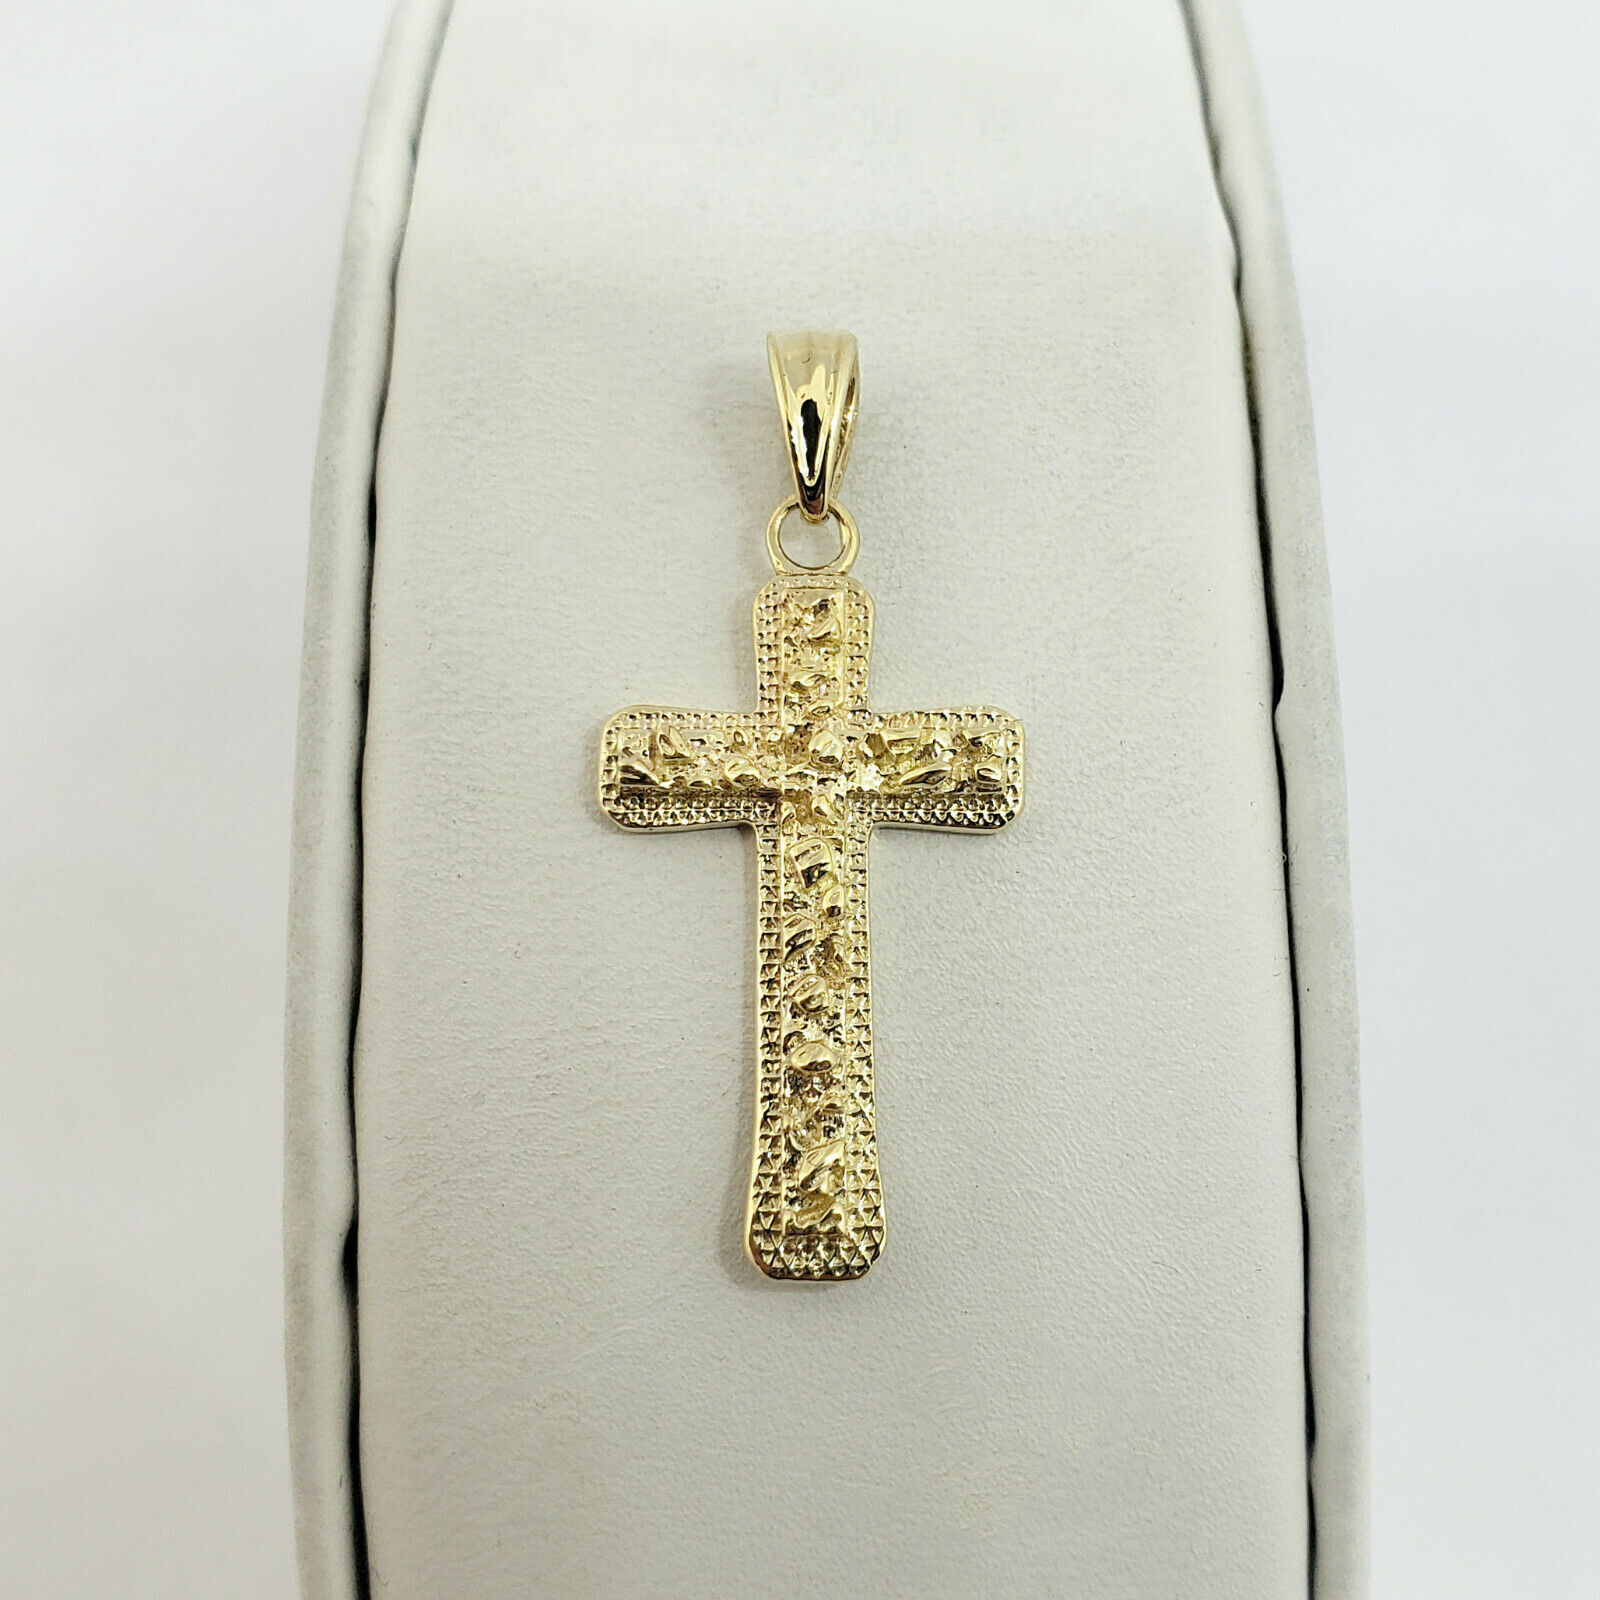 Solid 14k Yellow Gold Nugget Cross Small Size Pendant Necklace 